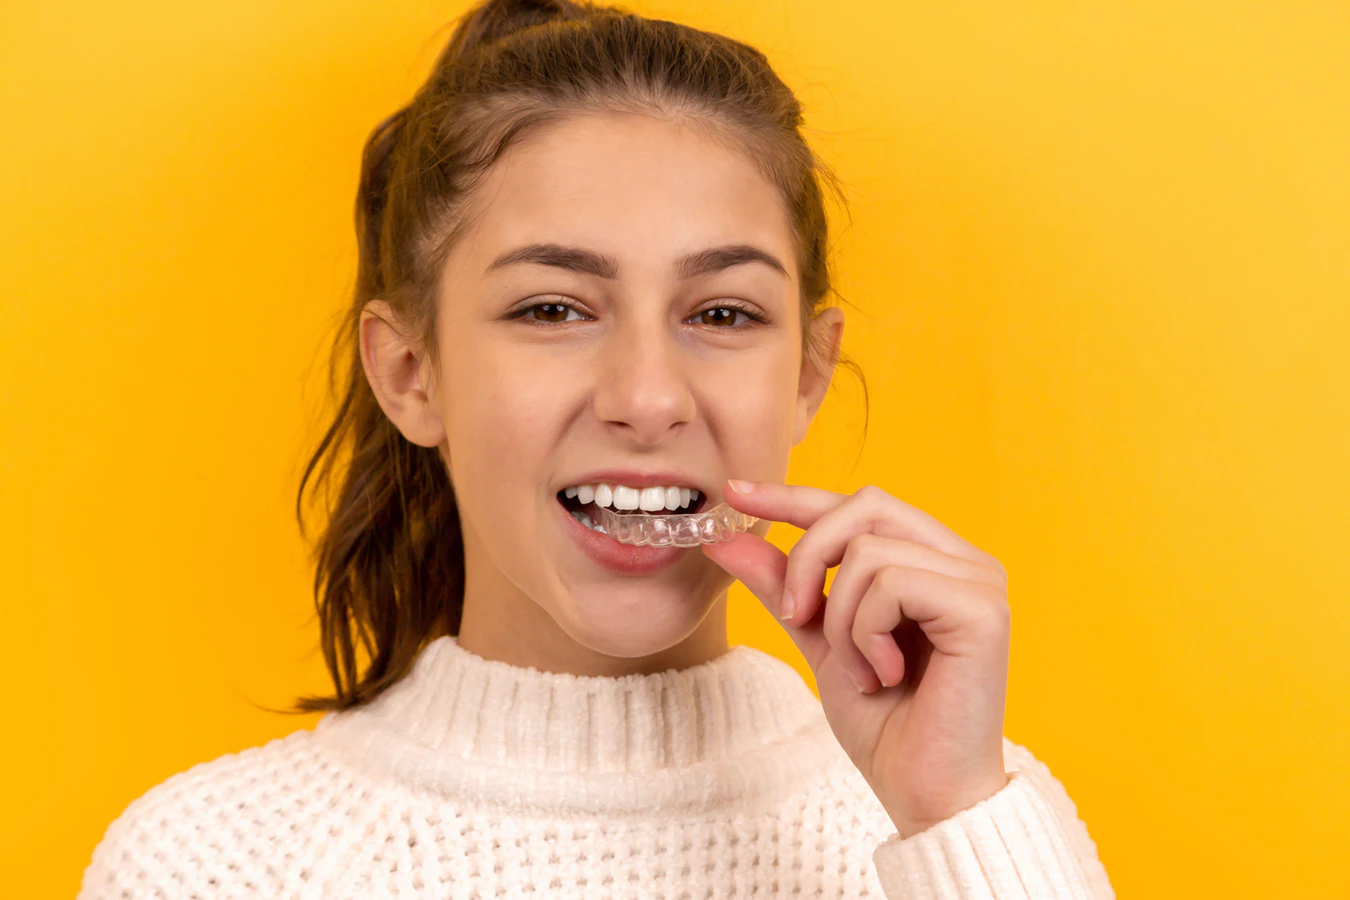 Should You Consider Getting Braces as an Adult?